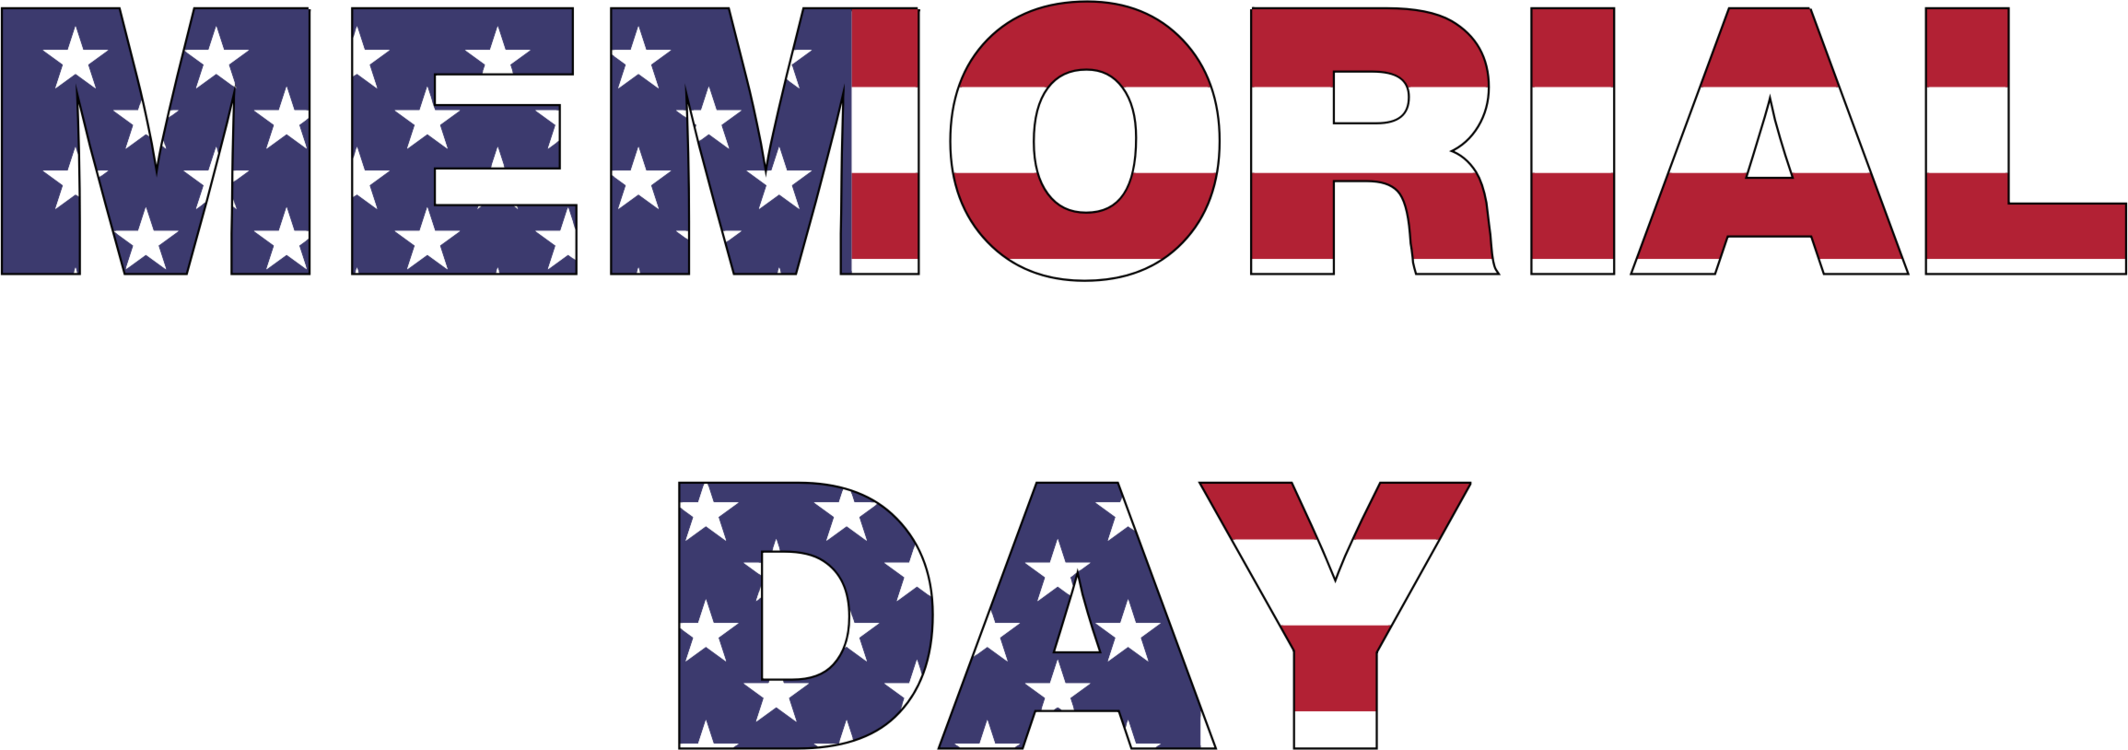 Memorial Day Clipart Png